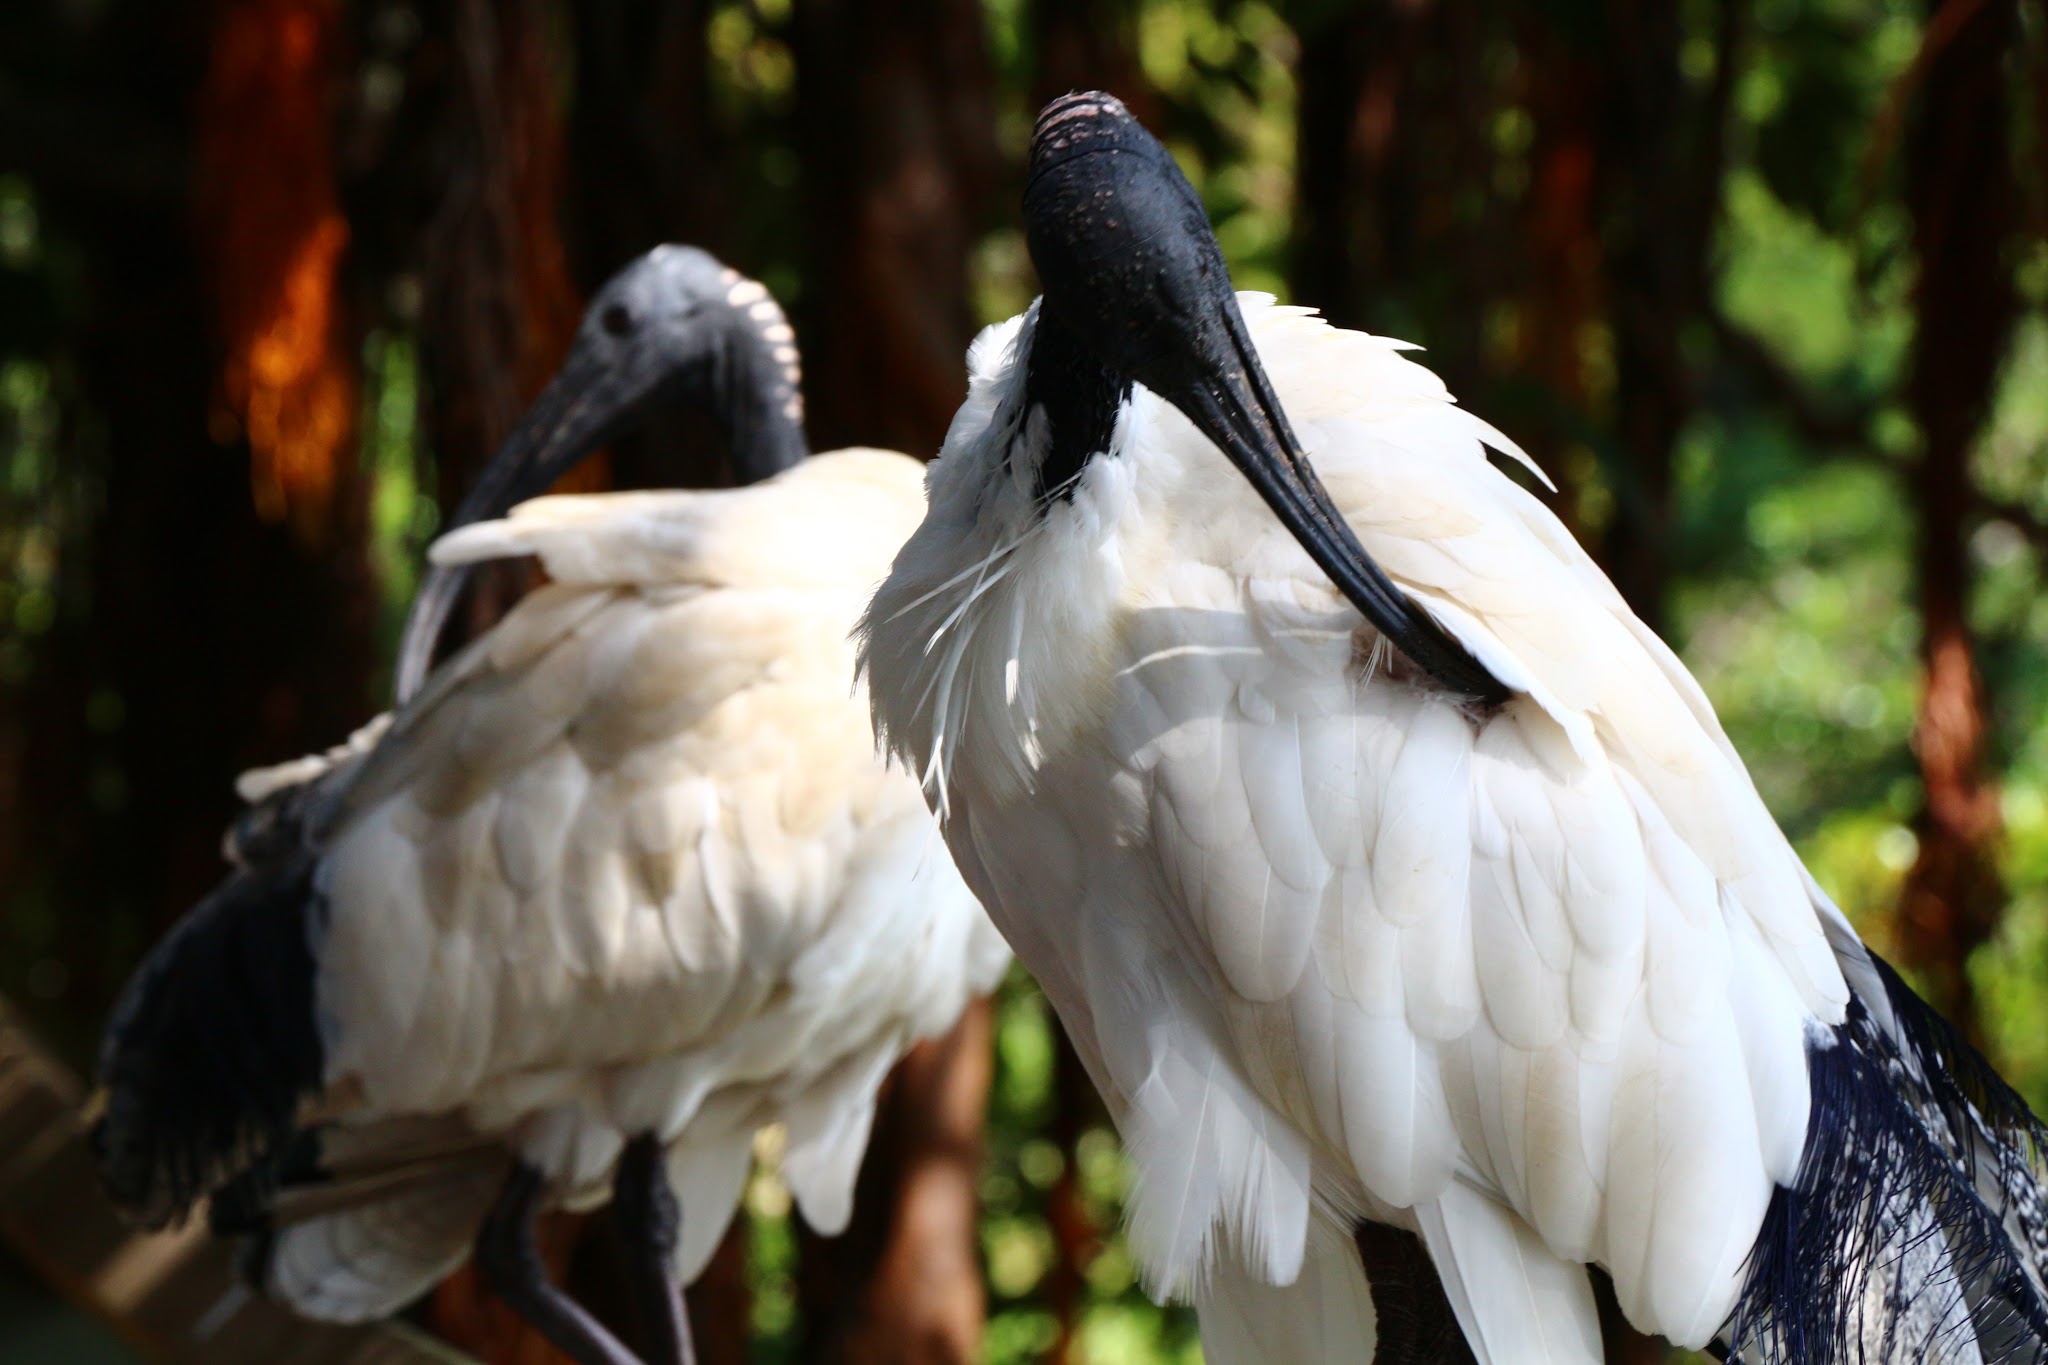 Two black-headed ibises preening. They are large birds with white feathers on their bodies and jet black heads. They have scythe-like bills that curve downwards that they are currently using to preen.
